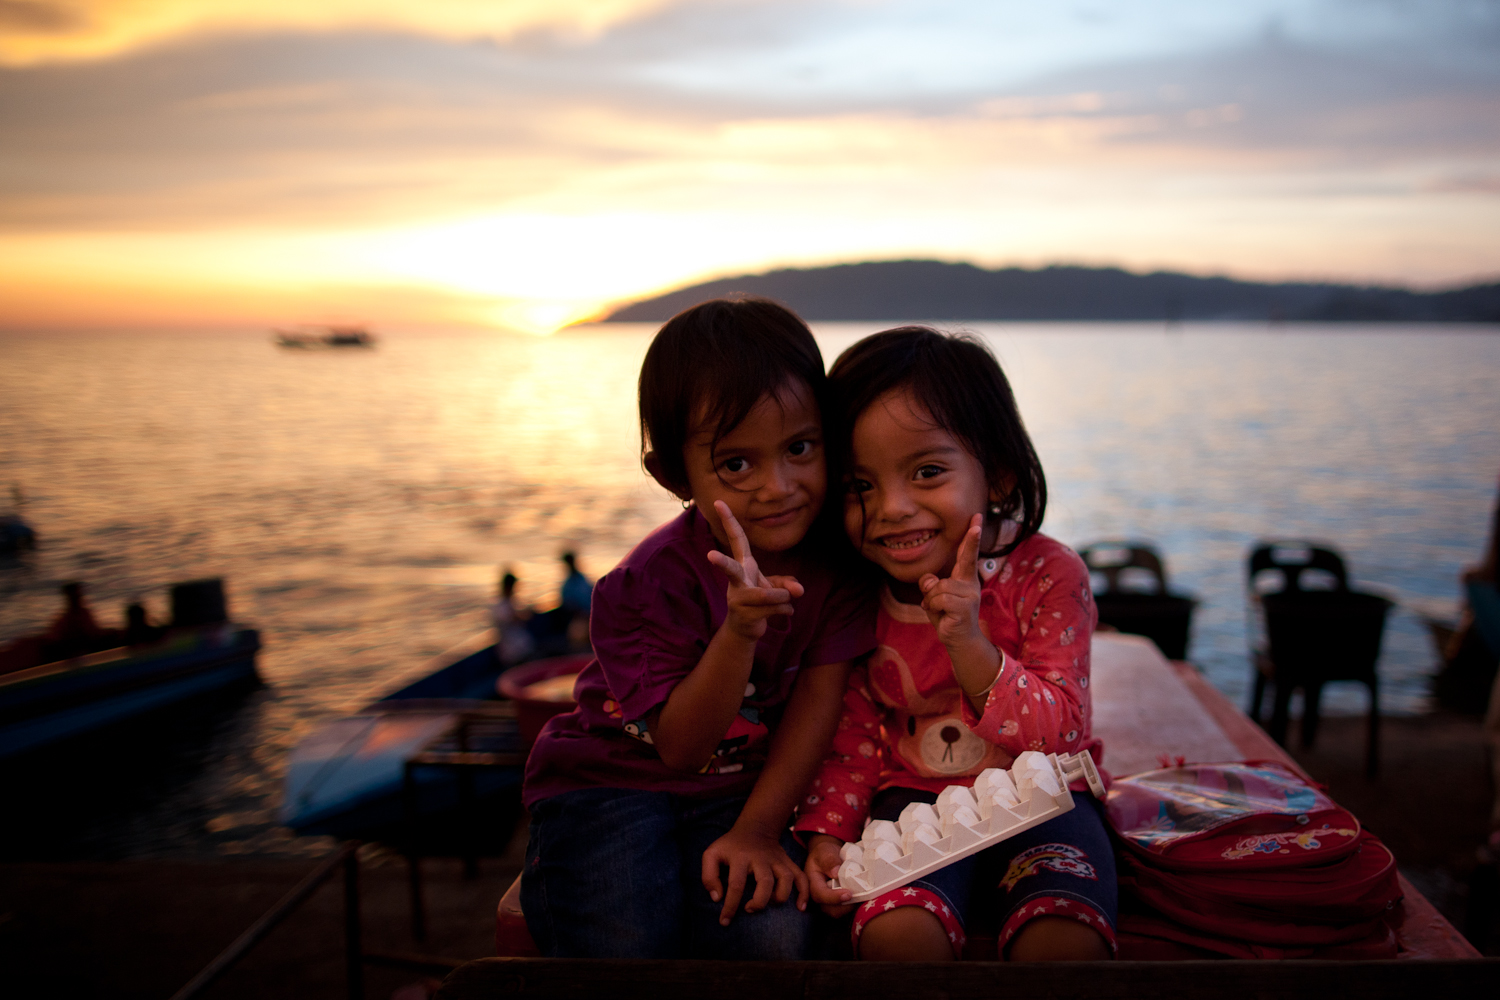 Two children doing peace signs by the sea at sunset